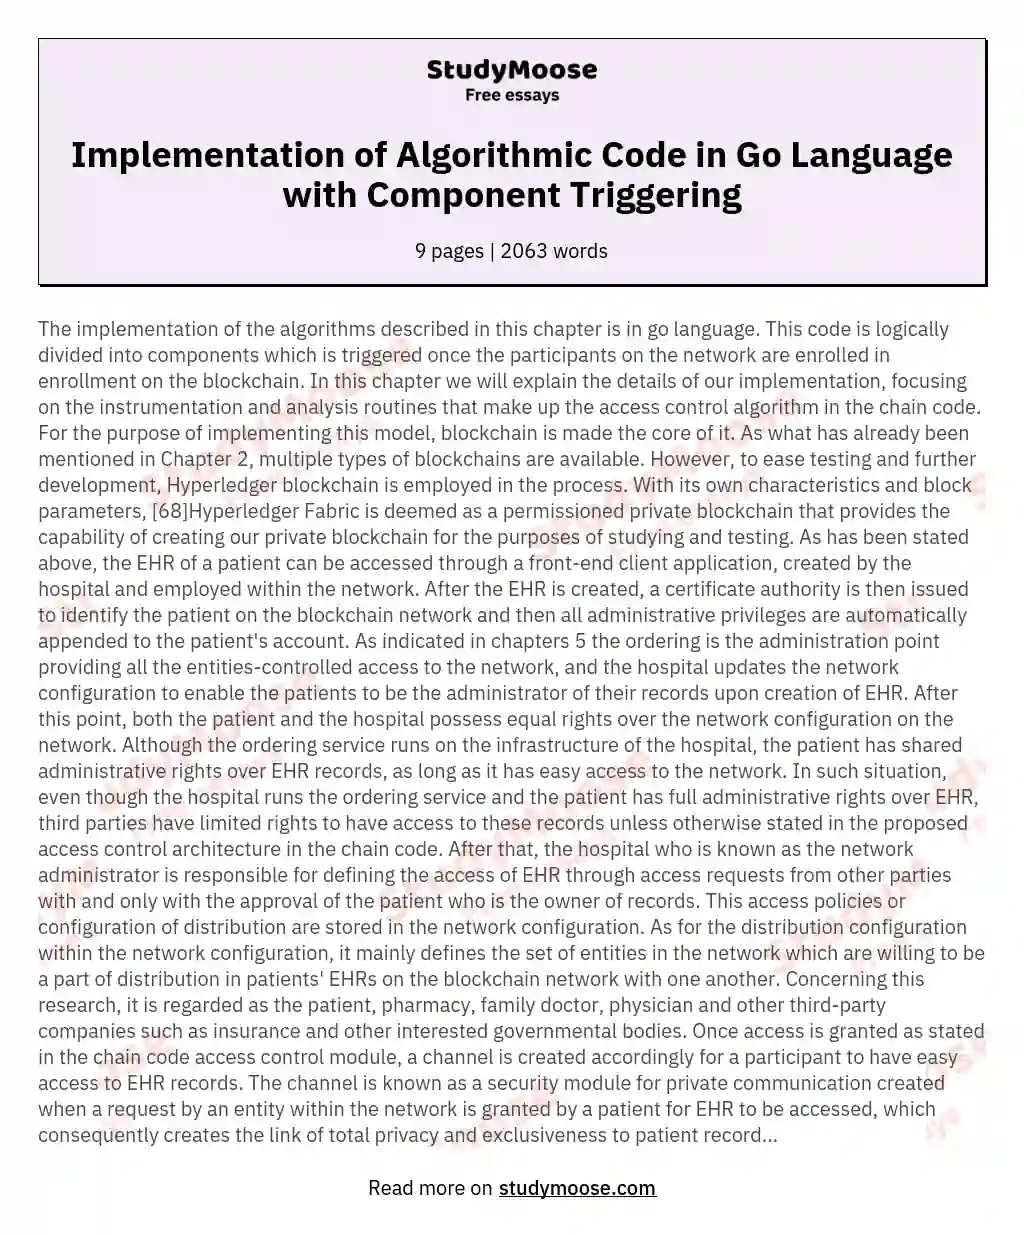 Implementation of Algorithmic Code in Go Language with Component Triggering essay